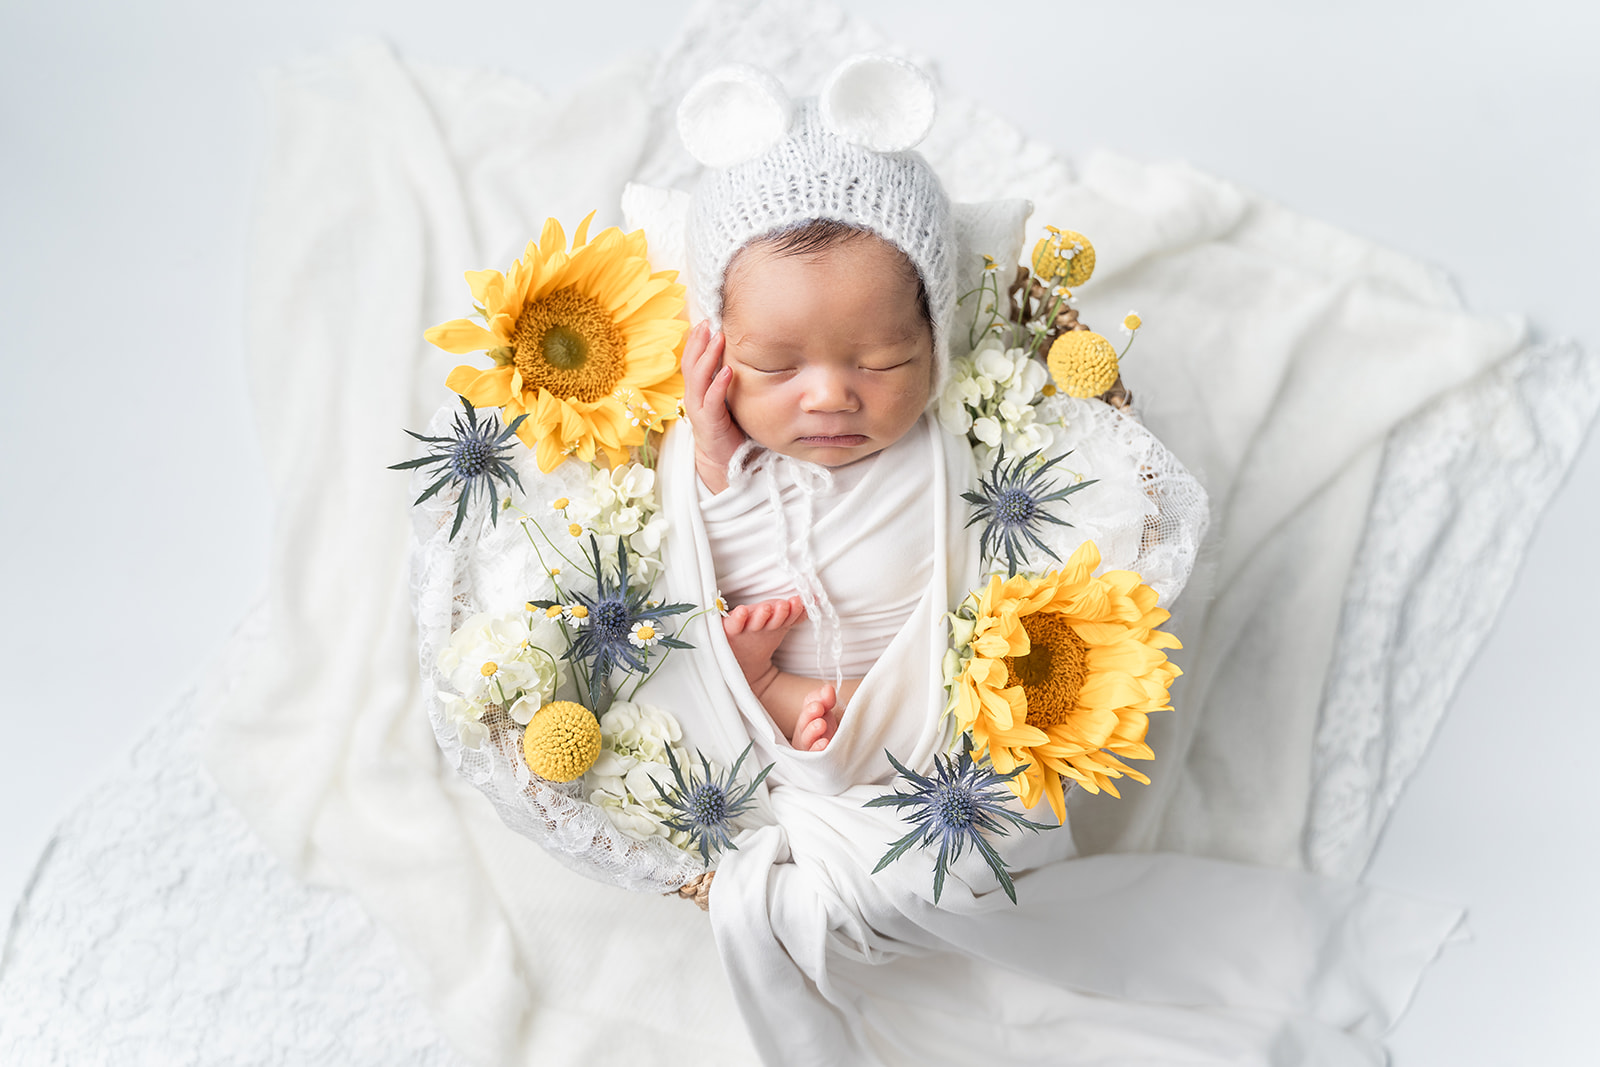 A newborn baby sleeps in a basket with sunflowers in a studio thanks to South Coast Midwifery